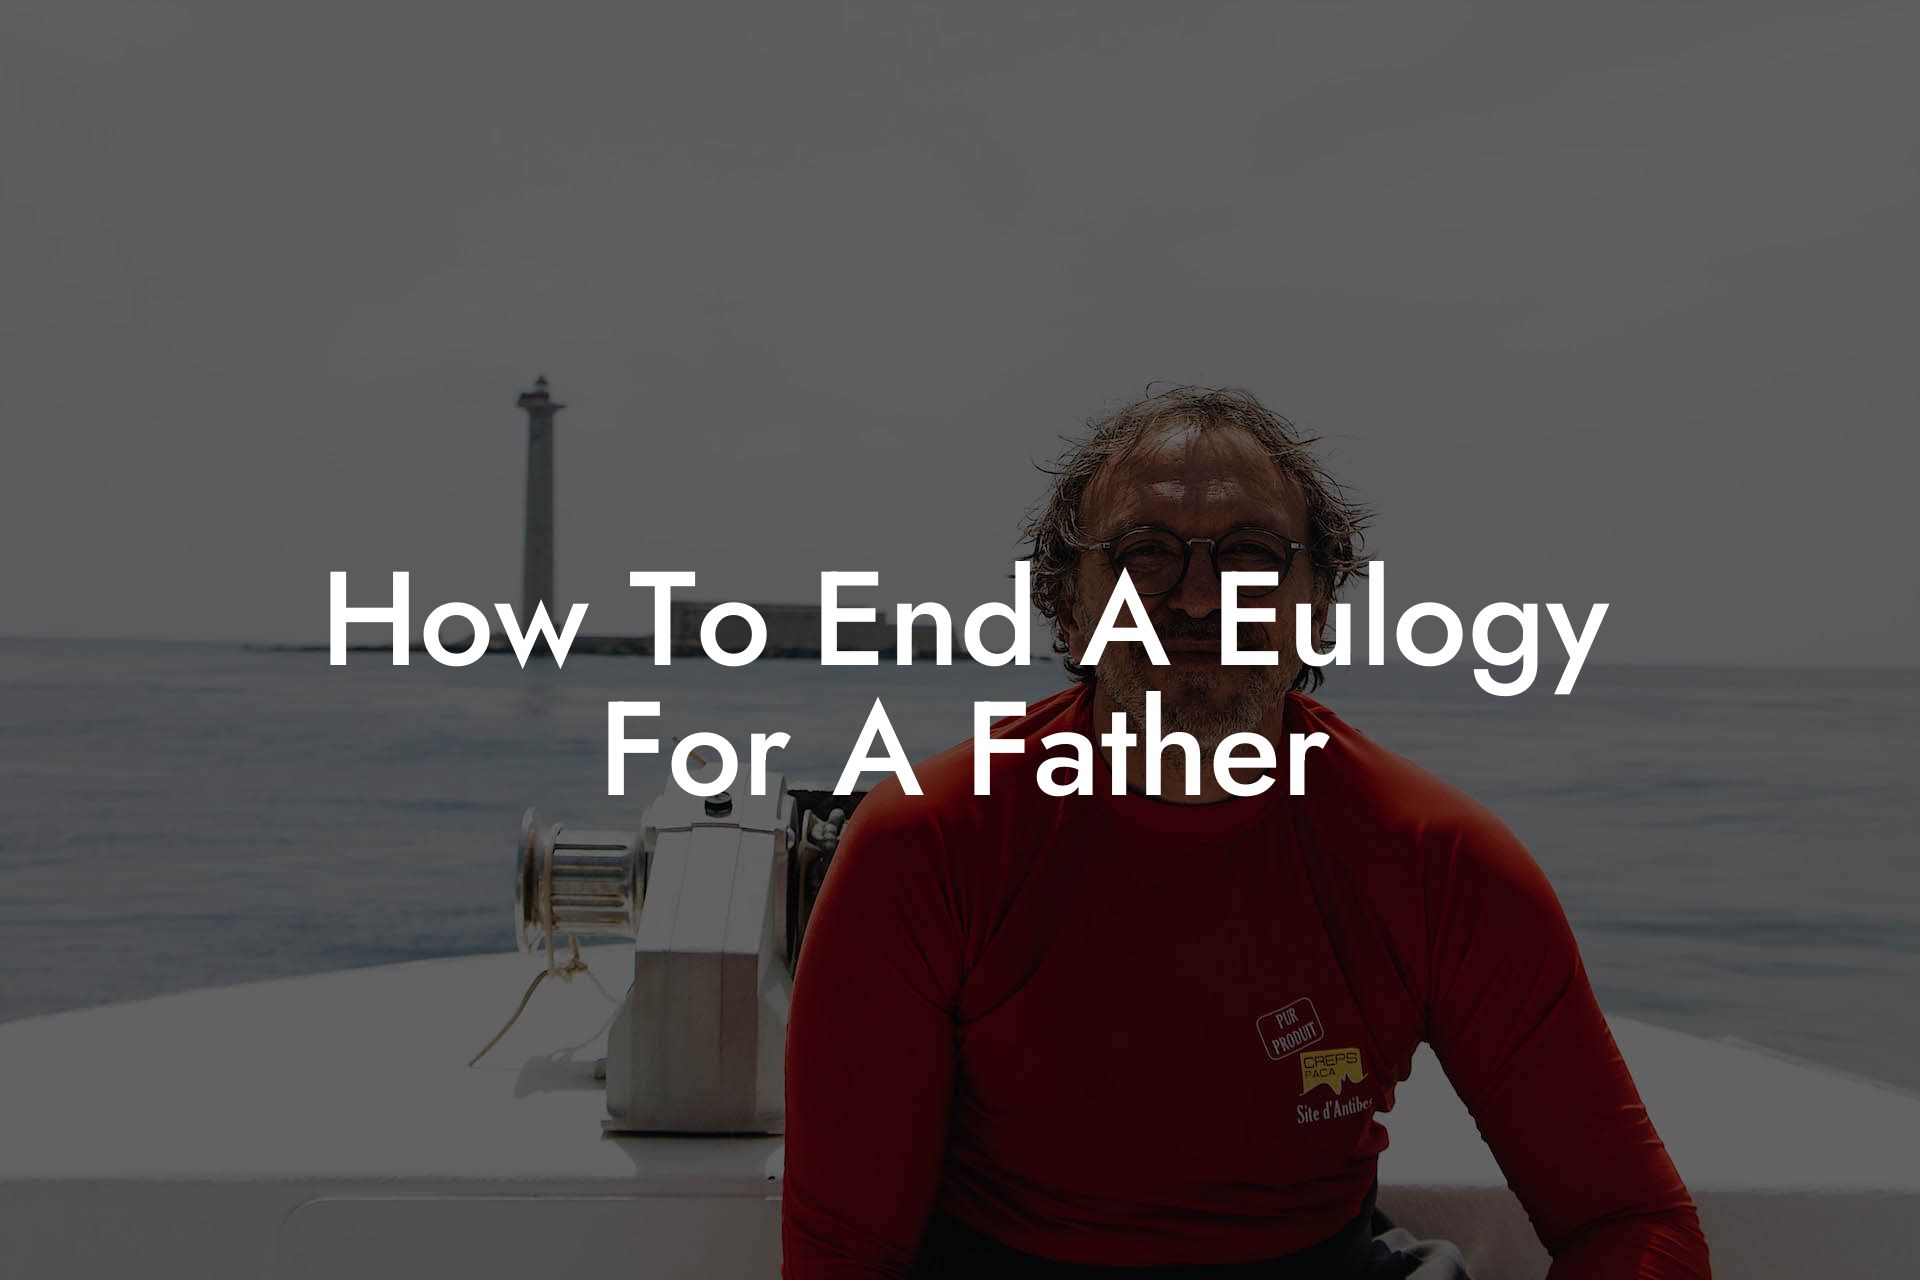 How To End A Eulogy For A Father